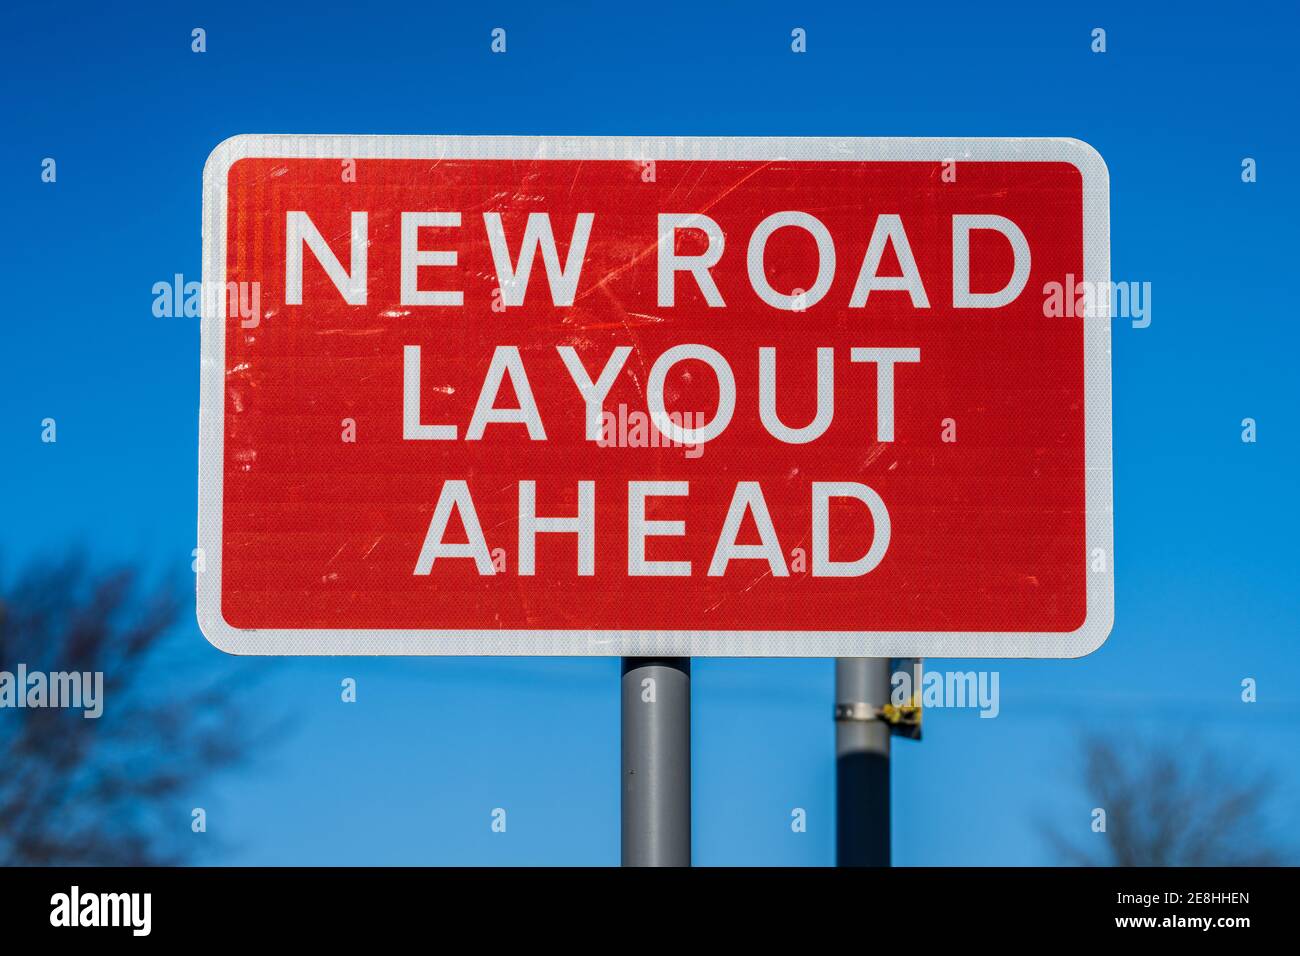 New Road Layout Sign. Red sign indicating a new road layout ahead. Stock Photo